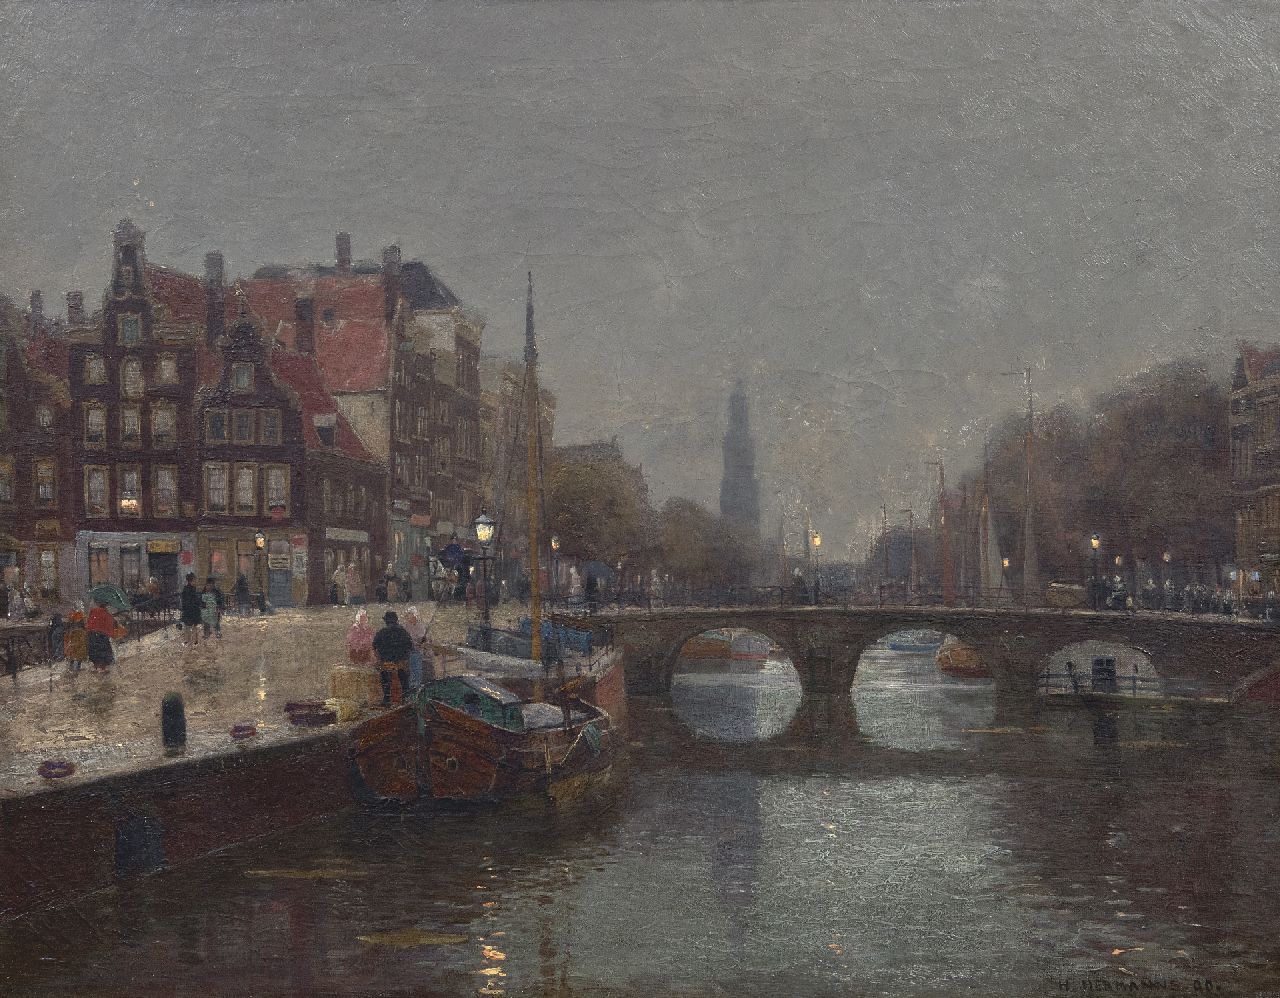 Hermanns H.  | Heinrich Hermanns | Paintings offered for sale | The Prinsengracht in Amsterdam on a rainy day, oil on canvas 55.8 x 70.7 cm, signed l.r. and dated '90